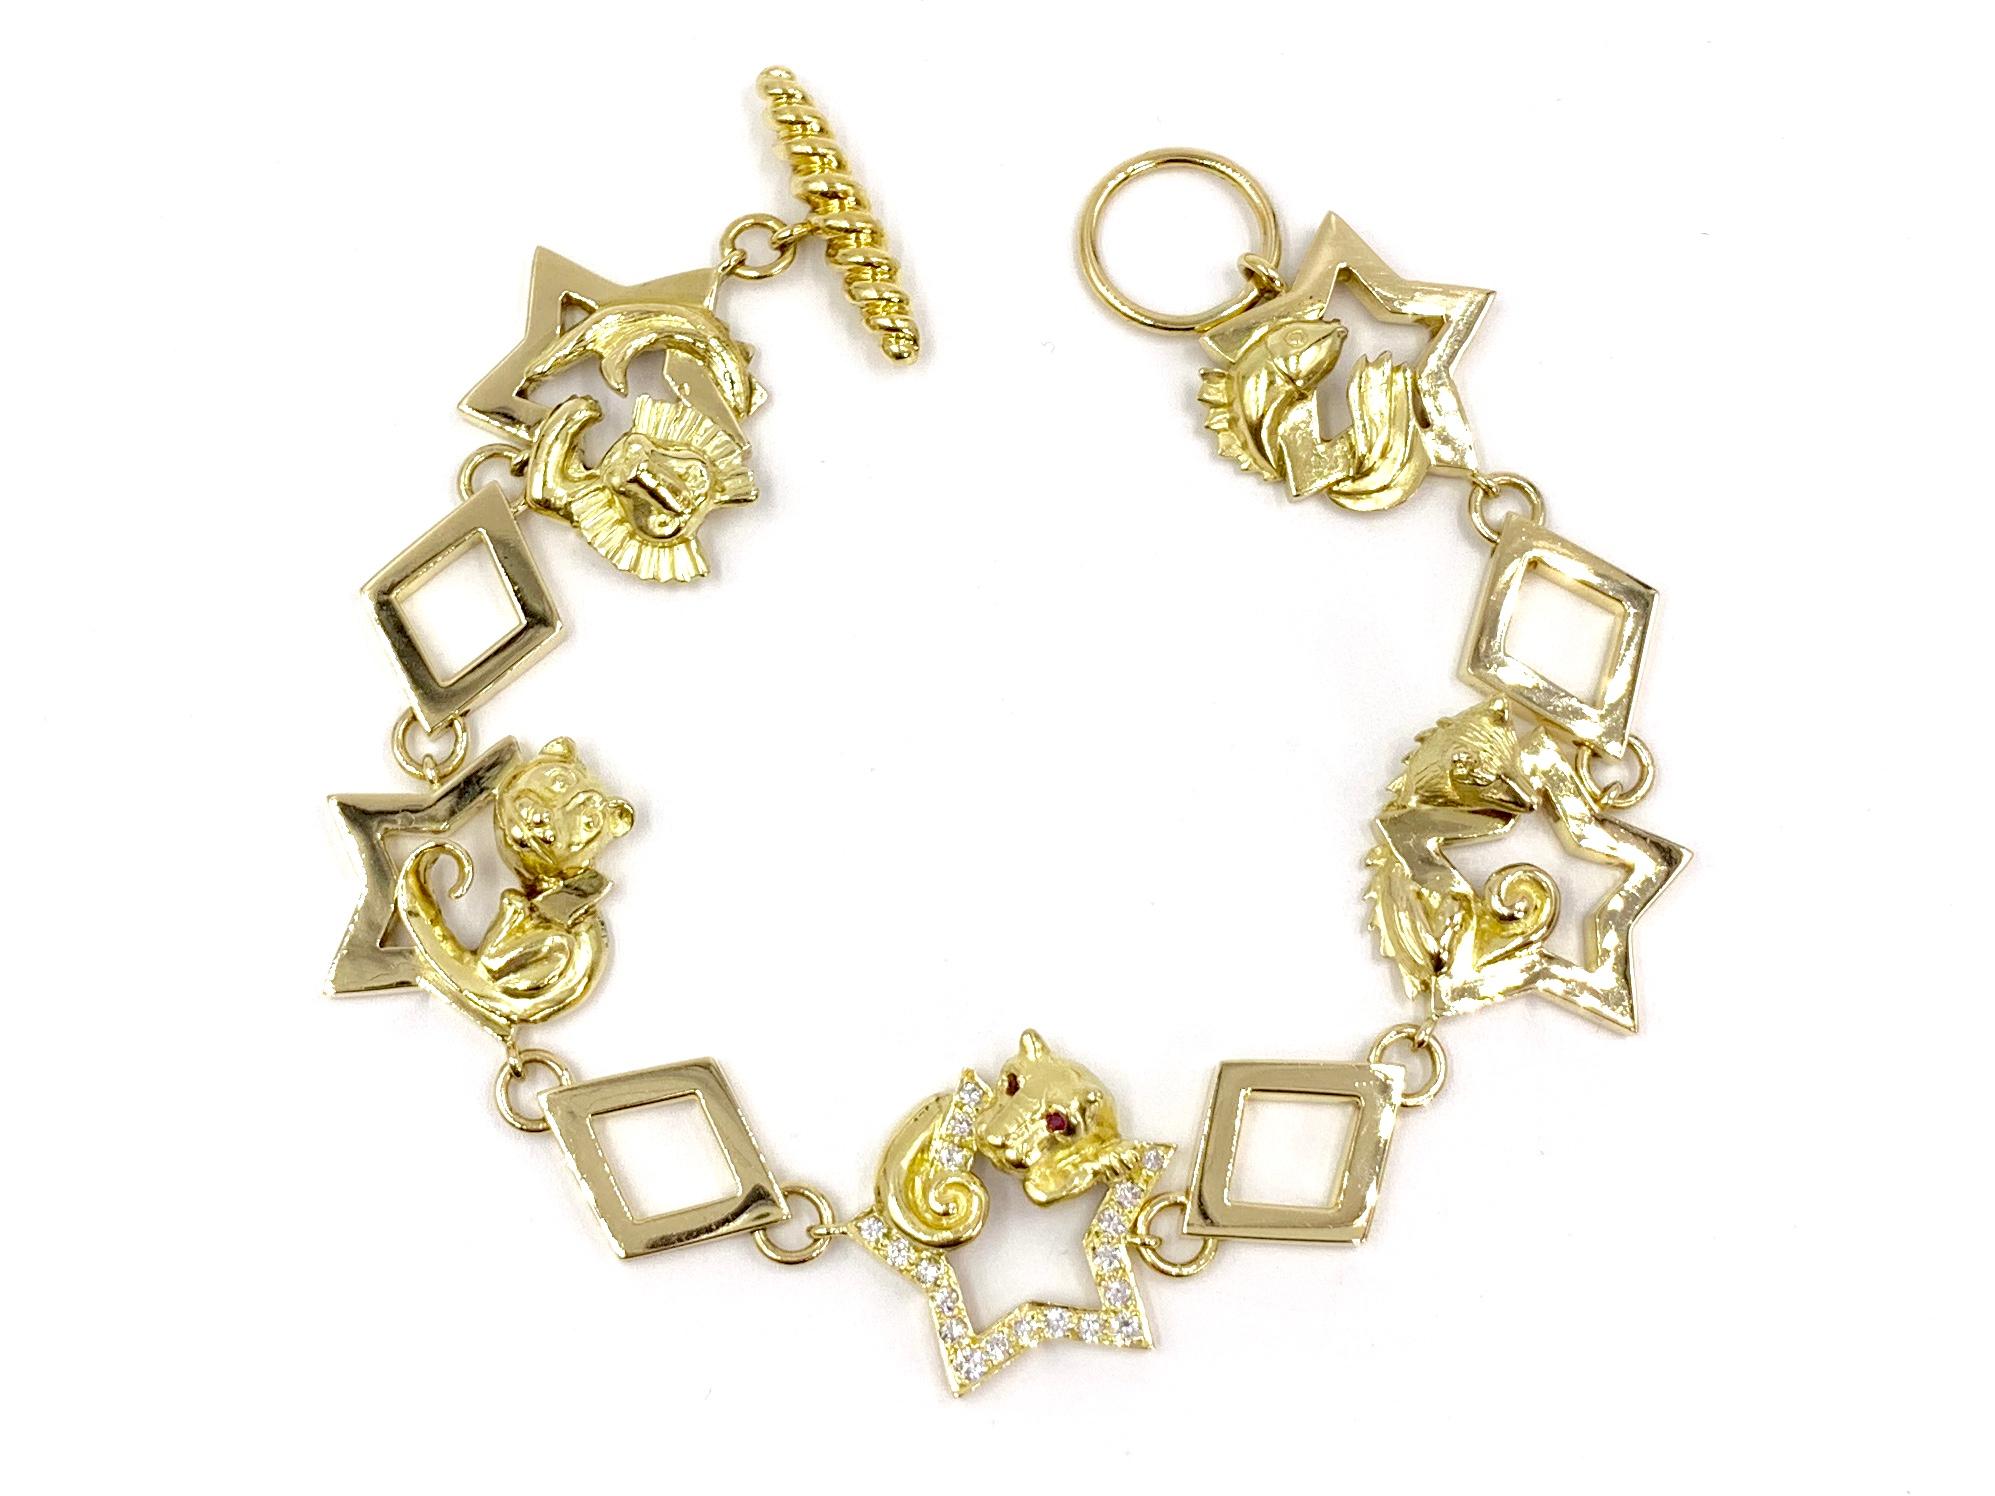 Created by expert jeweler Charles Turi. This vintage 18 karat yellow gold charm style bracelet with square and star links feature five different animals, including a panther adorned with ruby eyes. The panther rests upon a center star that is set